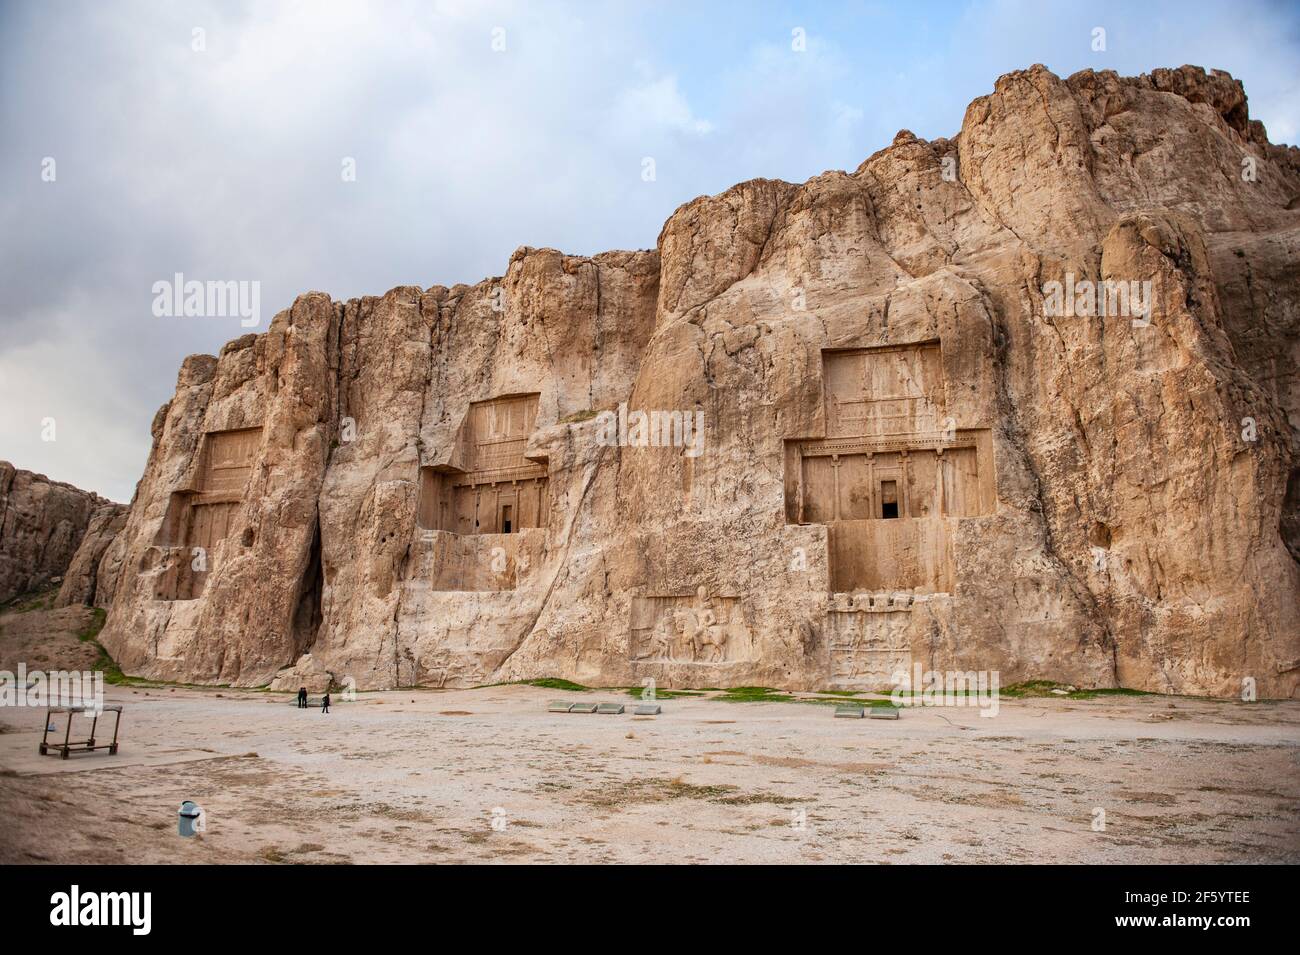 Naqsh-e Rostam ancient necropolis with tombs of Achaemenid kings, located near Persepolis in Iran Stock Photo